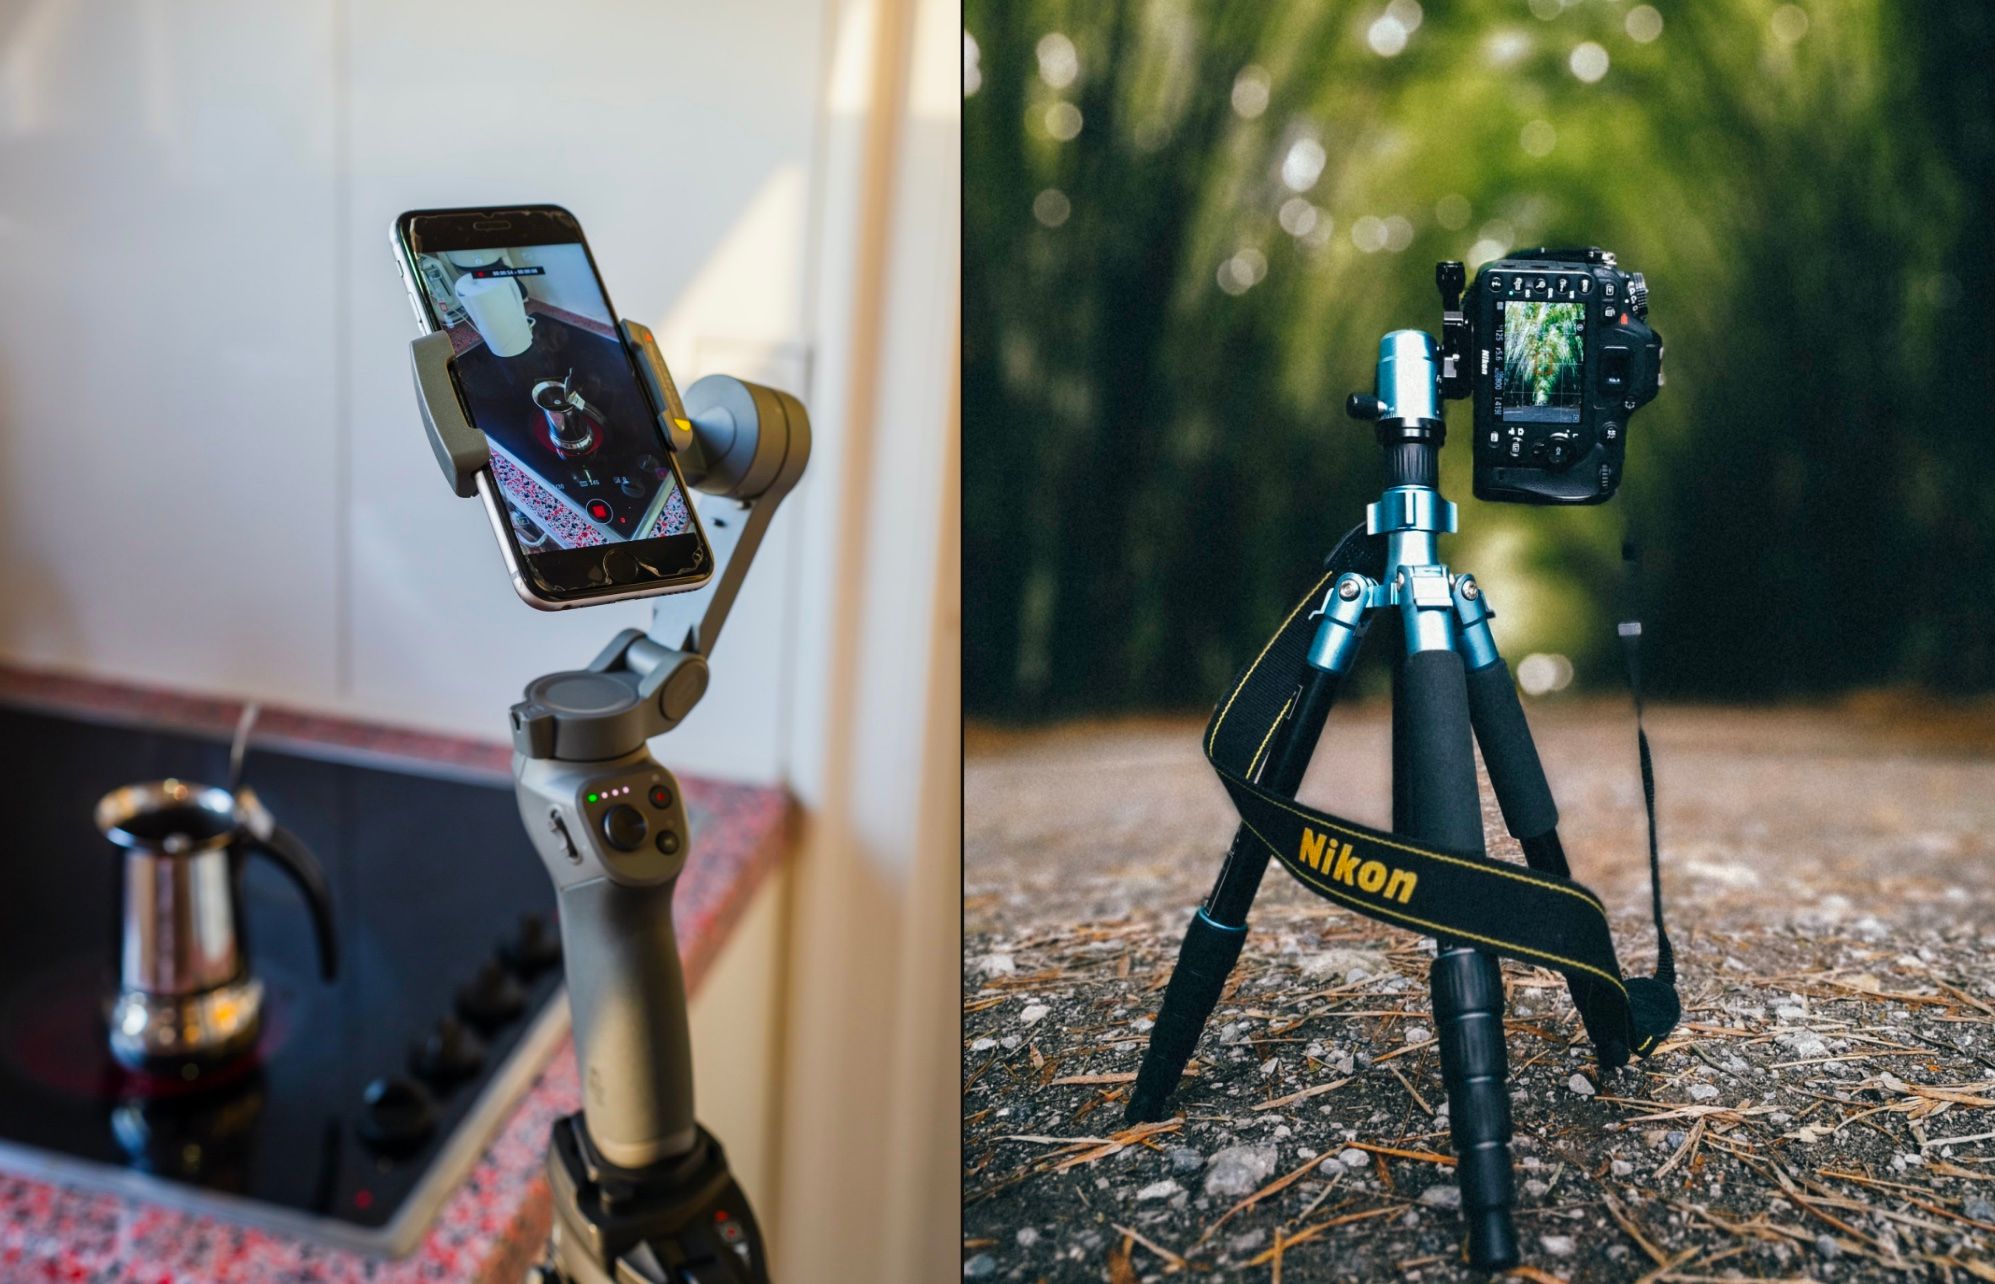 Two photos of tripods, one holding a phone camera, one holding a professional camera